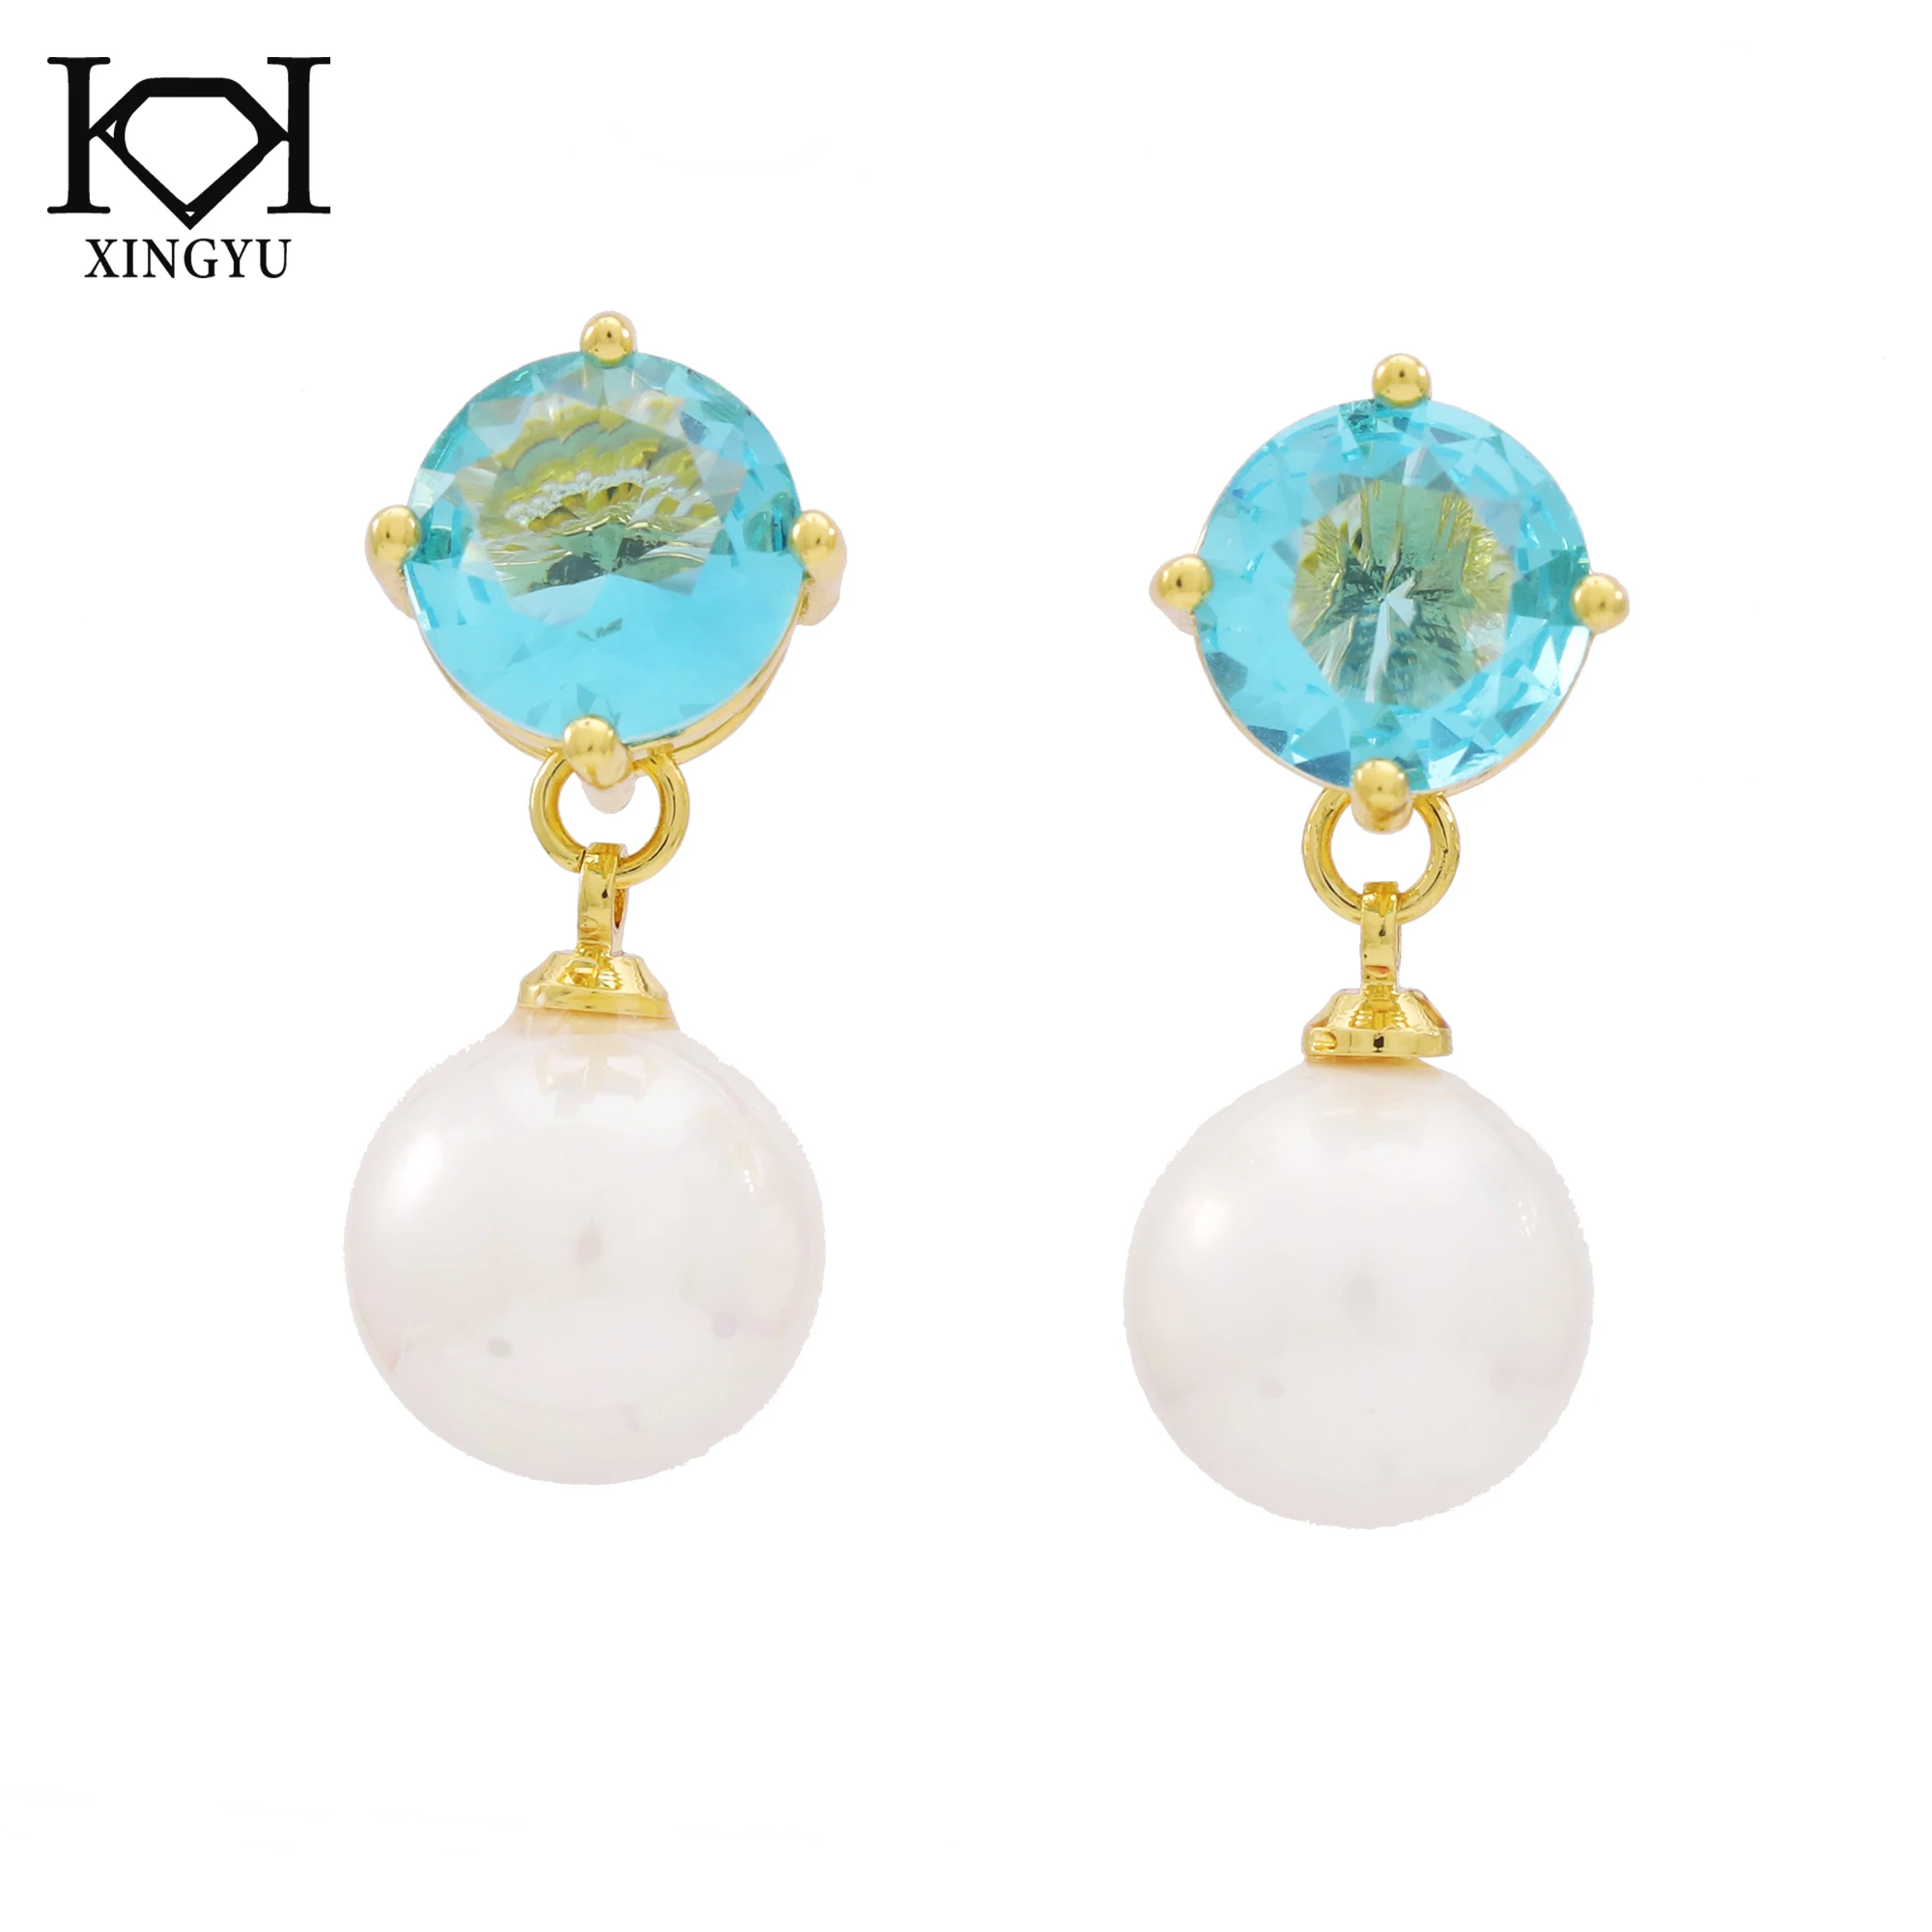 Fashion Round Shell Earrings Gold Plated Pink Blue Stones Long Earrings